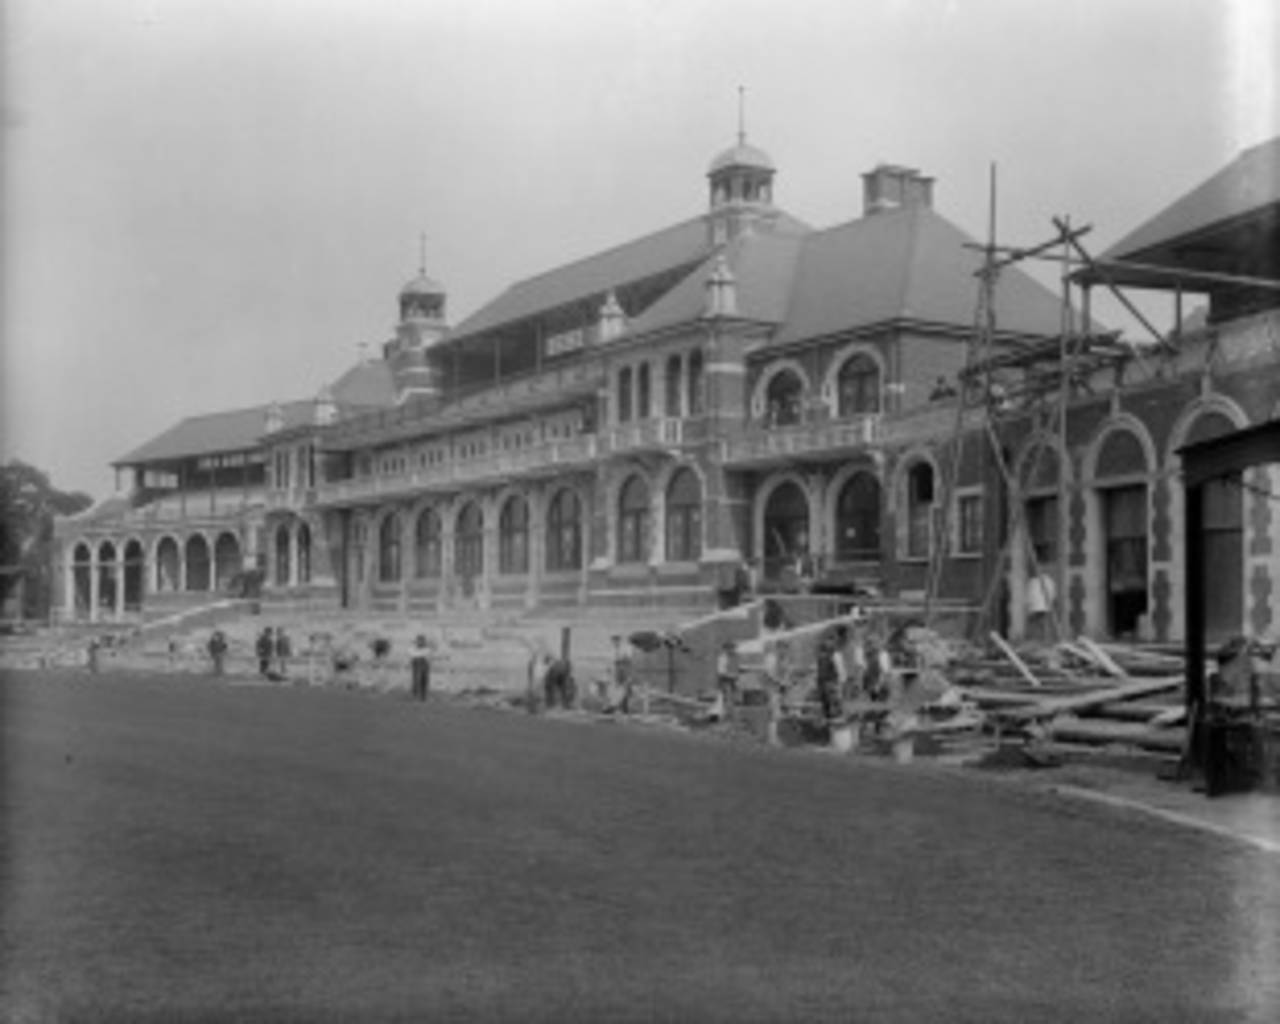 Workmen put the final touches to the new pavilion at The Oval, London, circa 1897